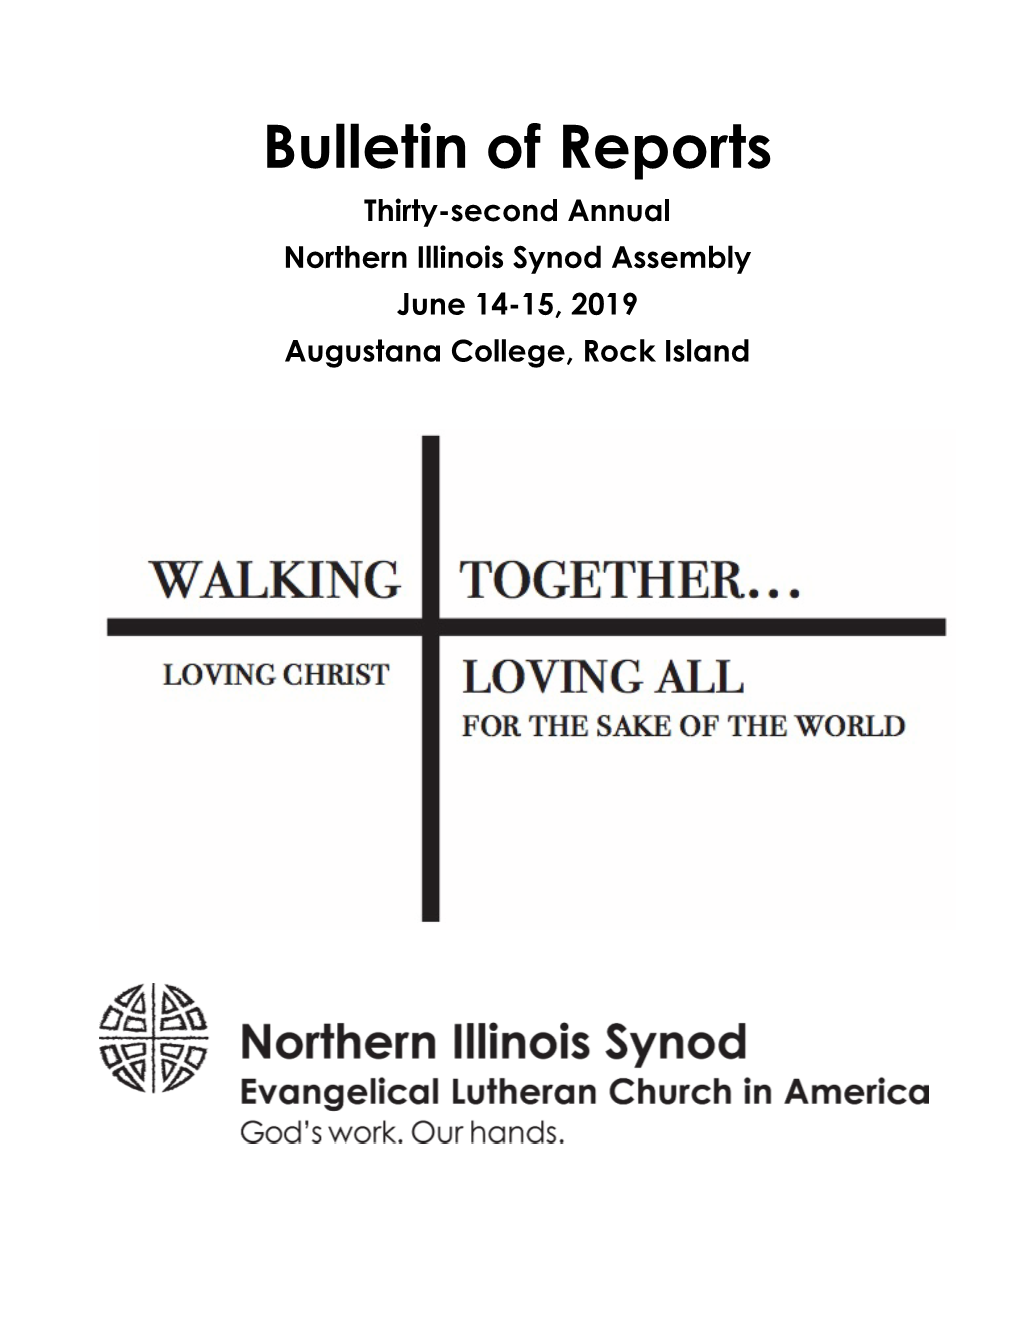 Bulletin of Reports Thirty-Second Annual Northern Illinois Synod Assembly June 14-15, 2019 Augustana College, Rock Island